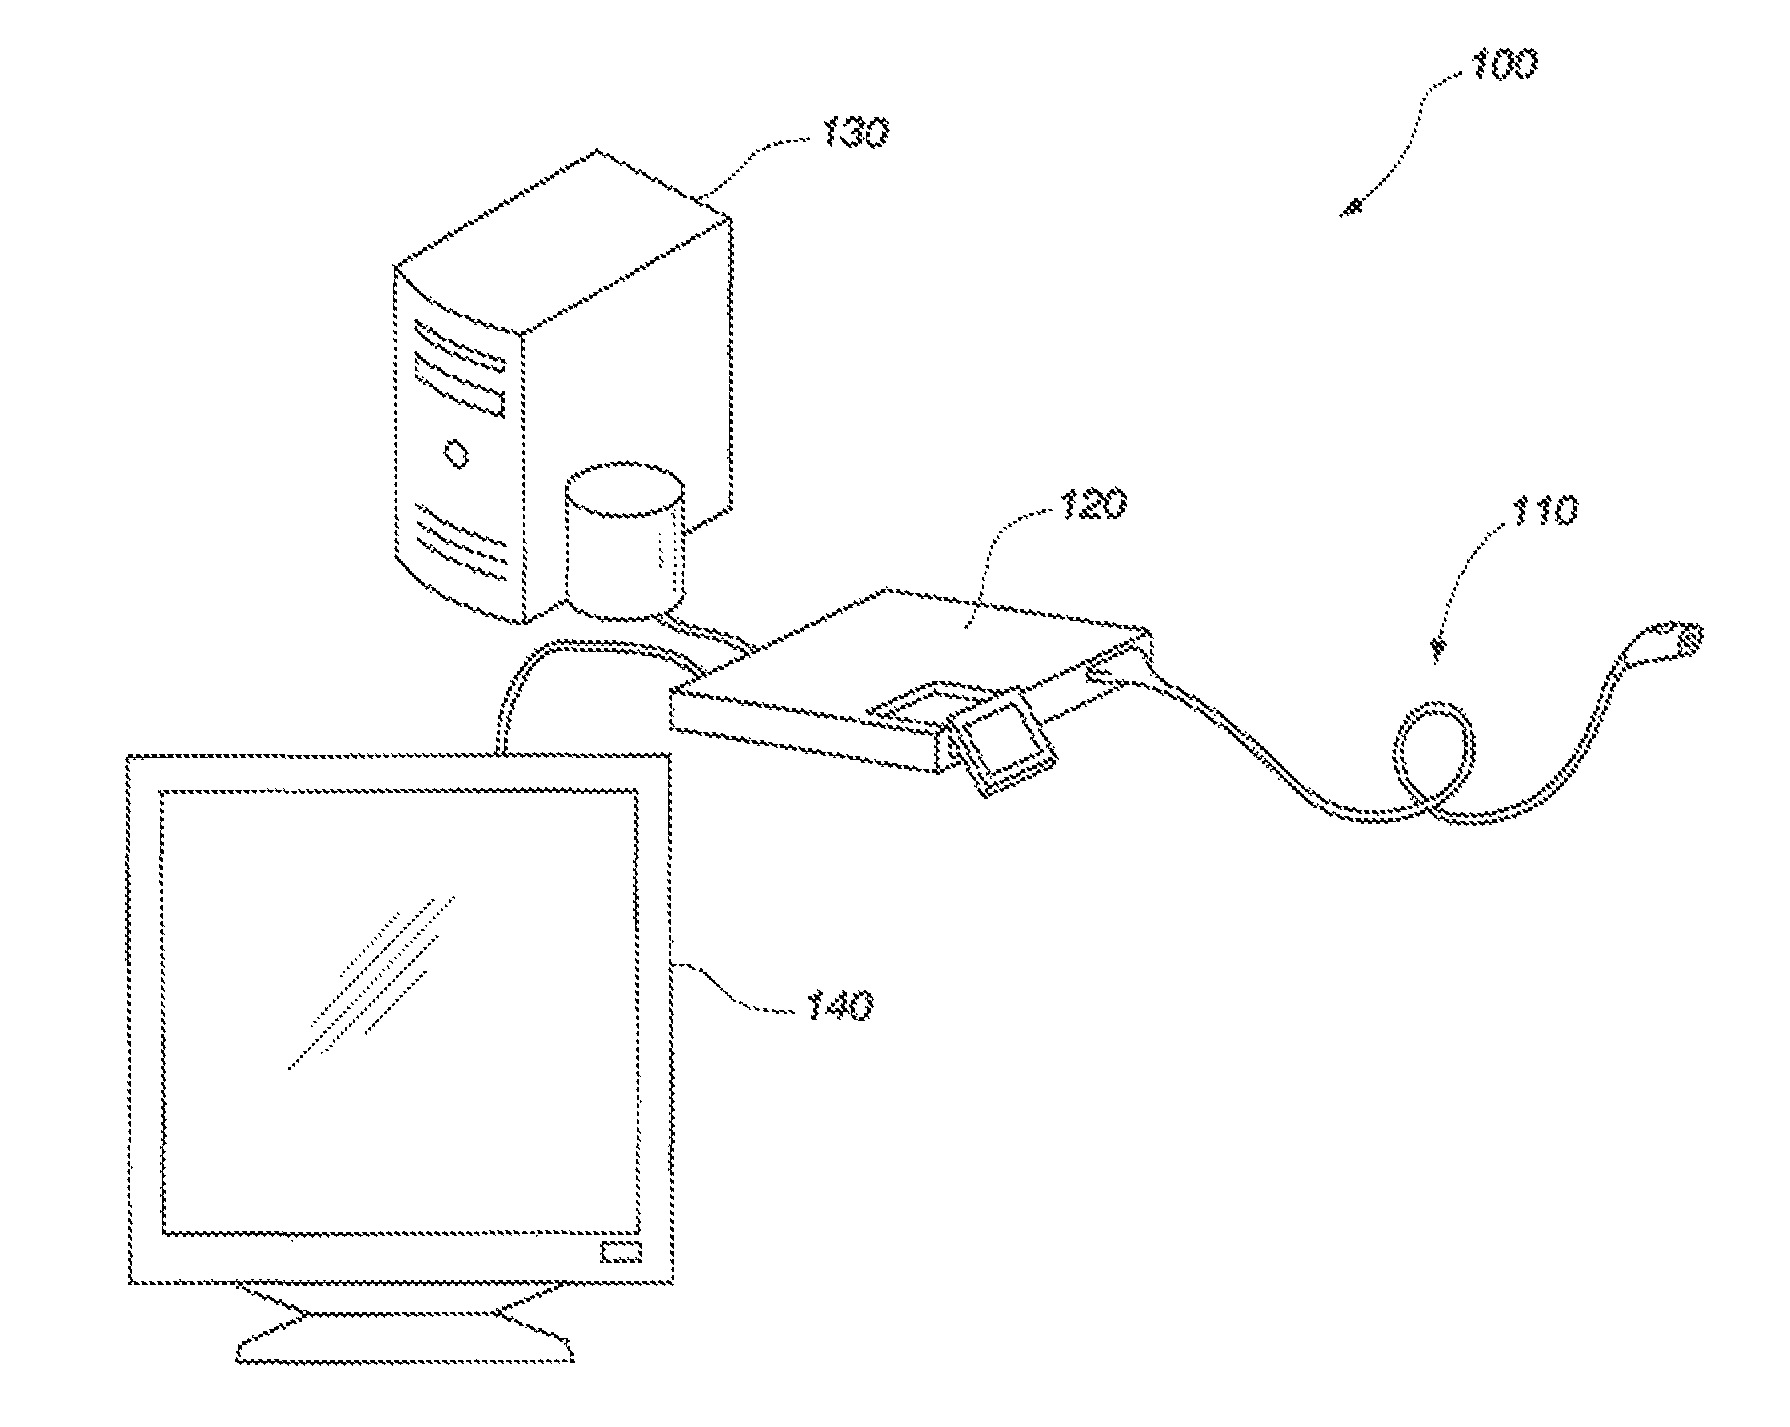 System and method for providing a single use imaging device for medical applications